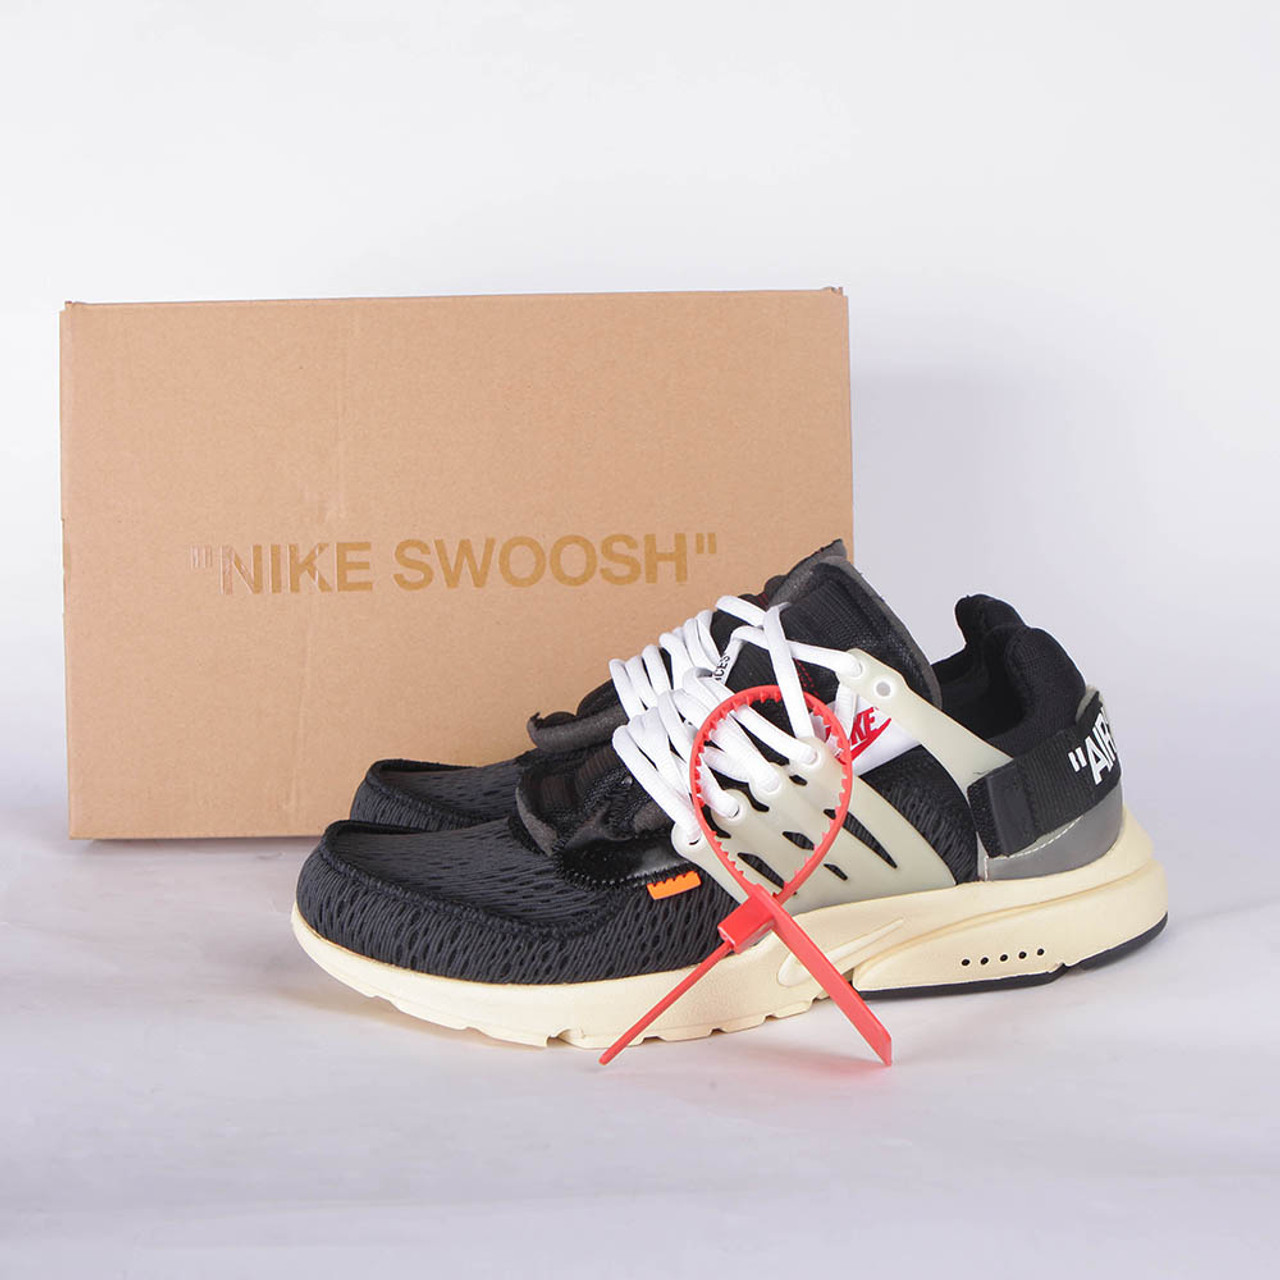 where to buy the stockX UA High quality replica off-white nike Air presto ( In white, All black, Original colorway) sneakers Hypedripz is the best high quality clone